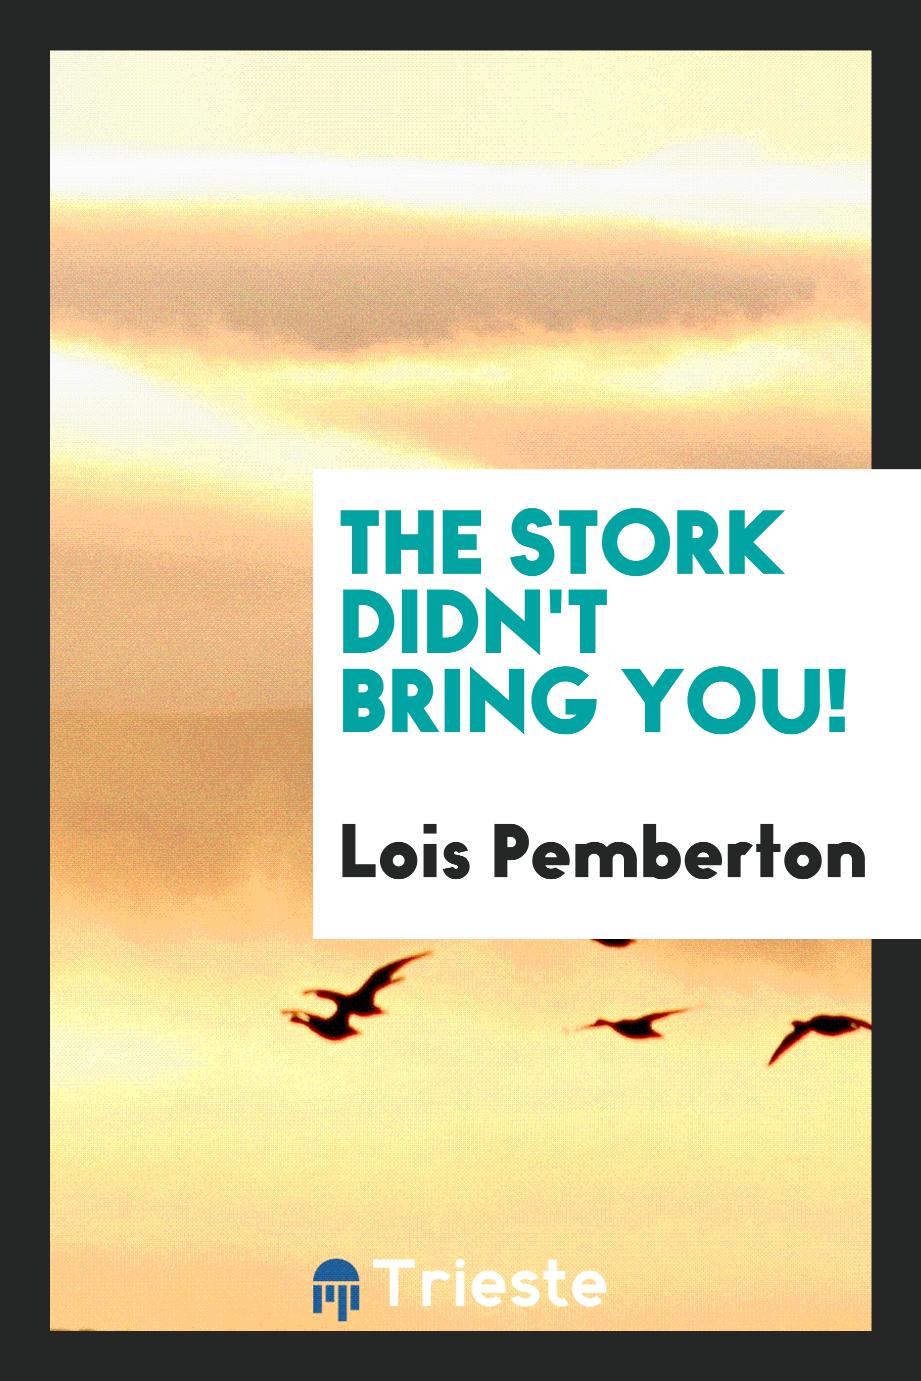 The stork didn't bring you!